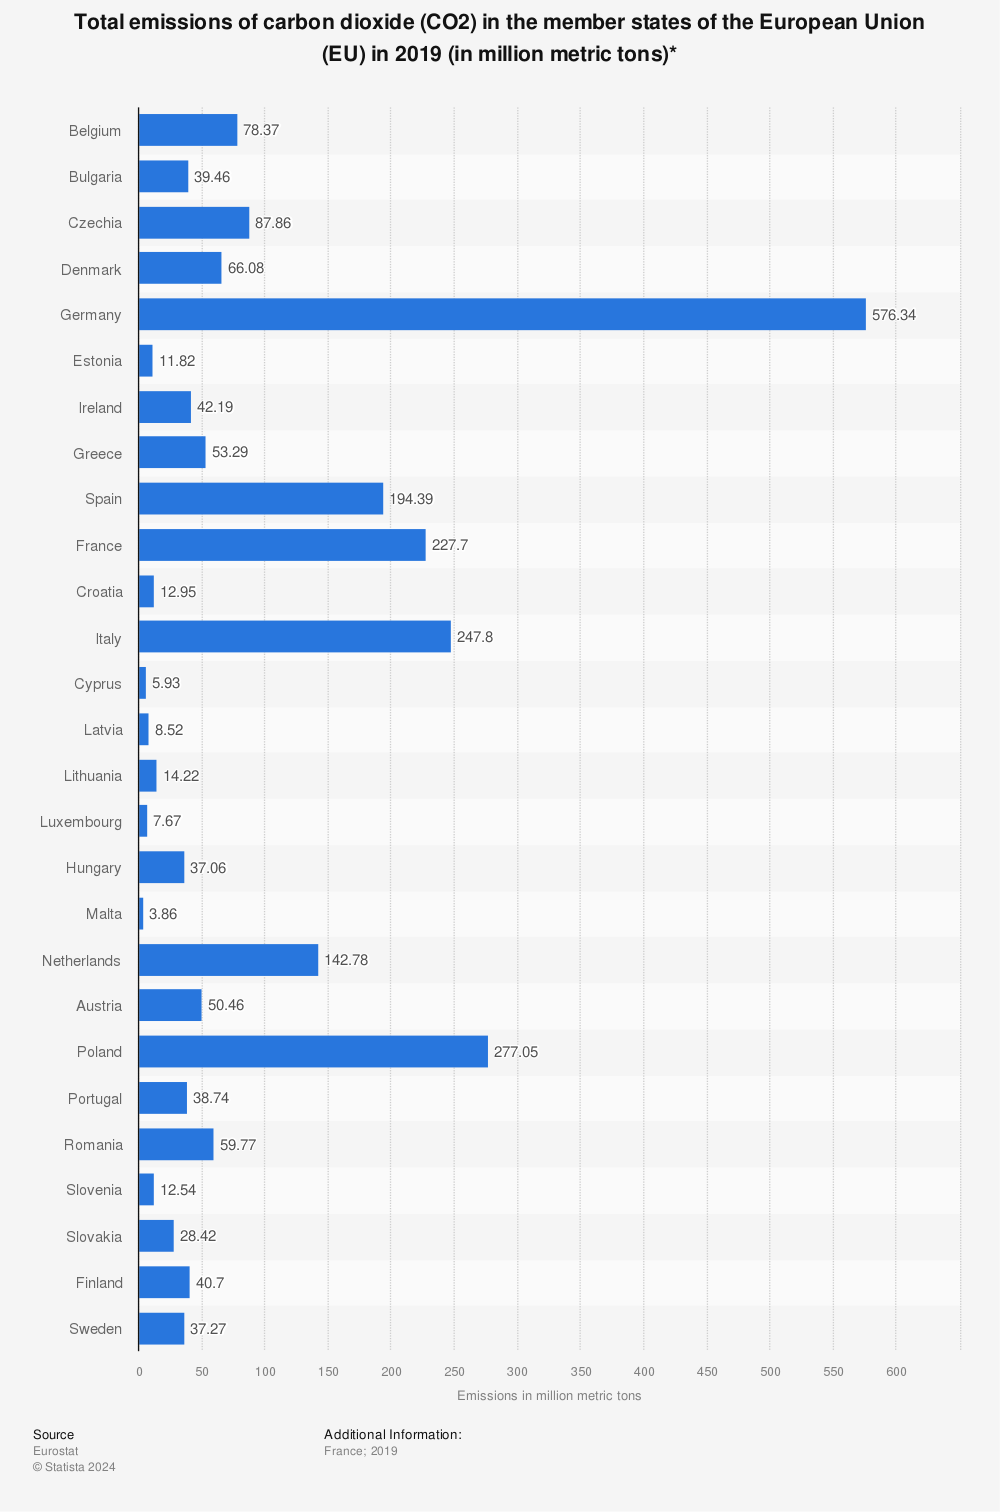 Statistic: Total emissions of carbon dioxide (CO2) in the member states of the European Union (EU) in 2019 (in million metric tons)* | Statista